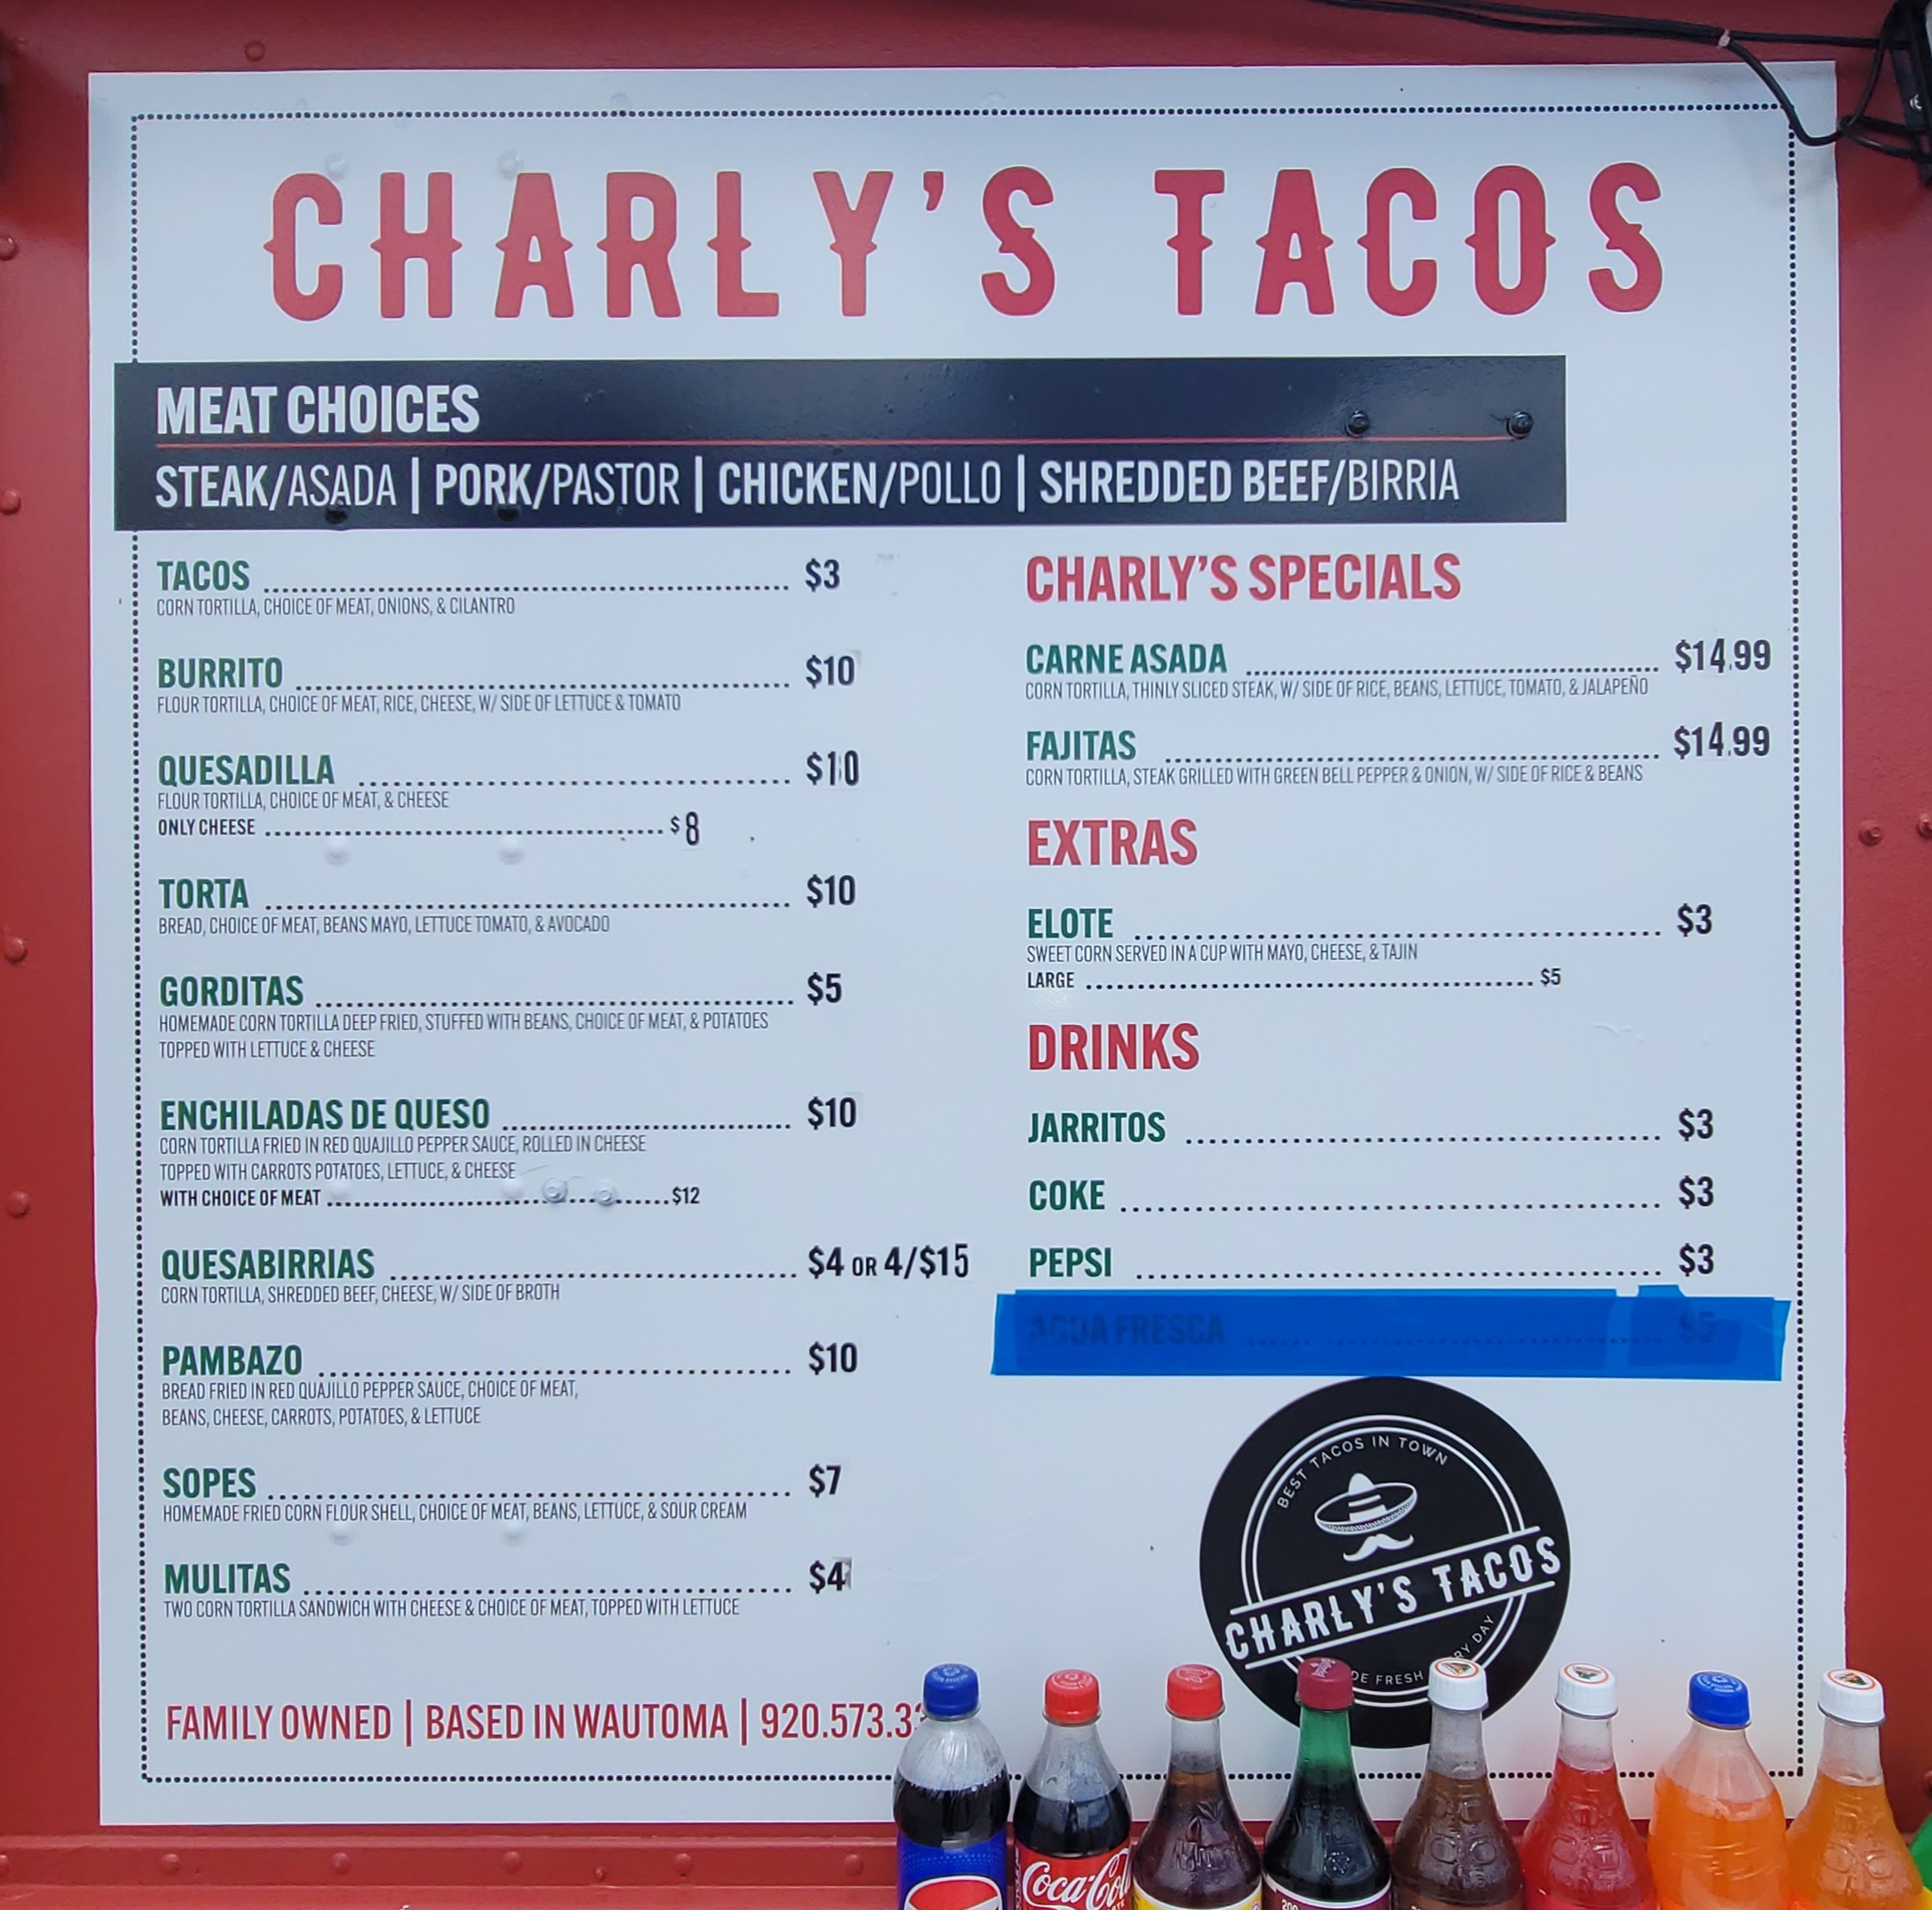 Charly's Tacos is providing their food services!(Not For Sale)